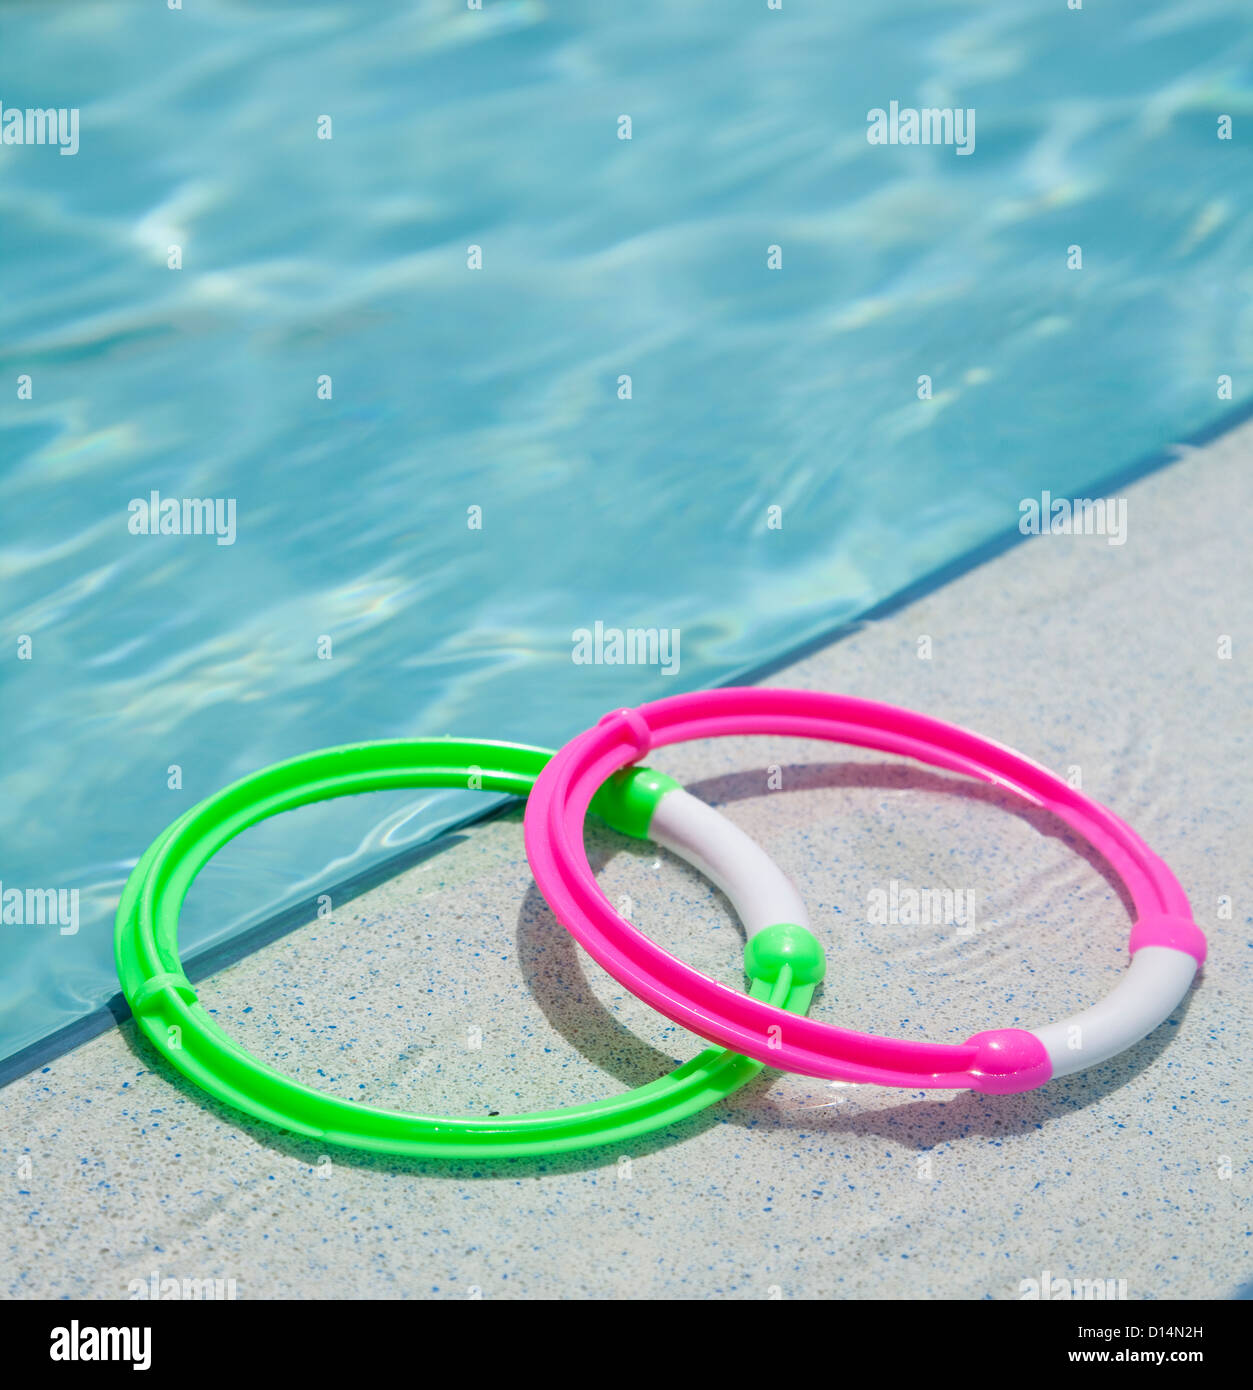 USA, Florida, St. Petersburg, two rings on poolside Stock Photo